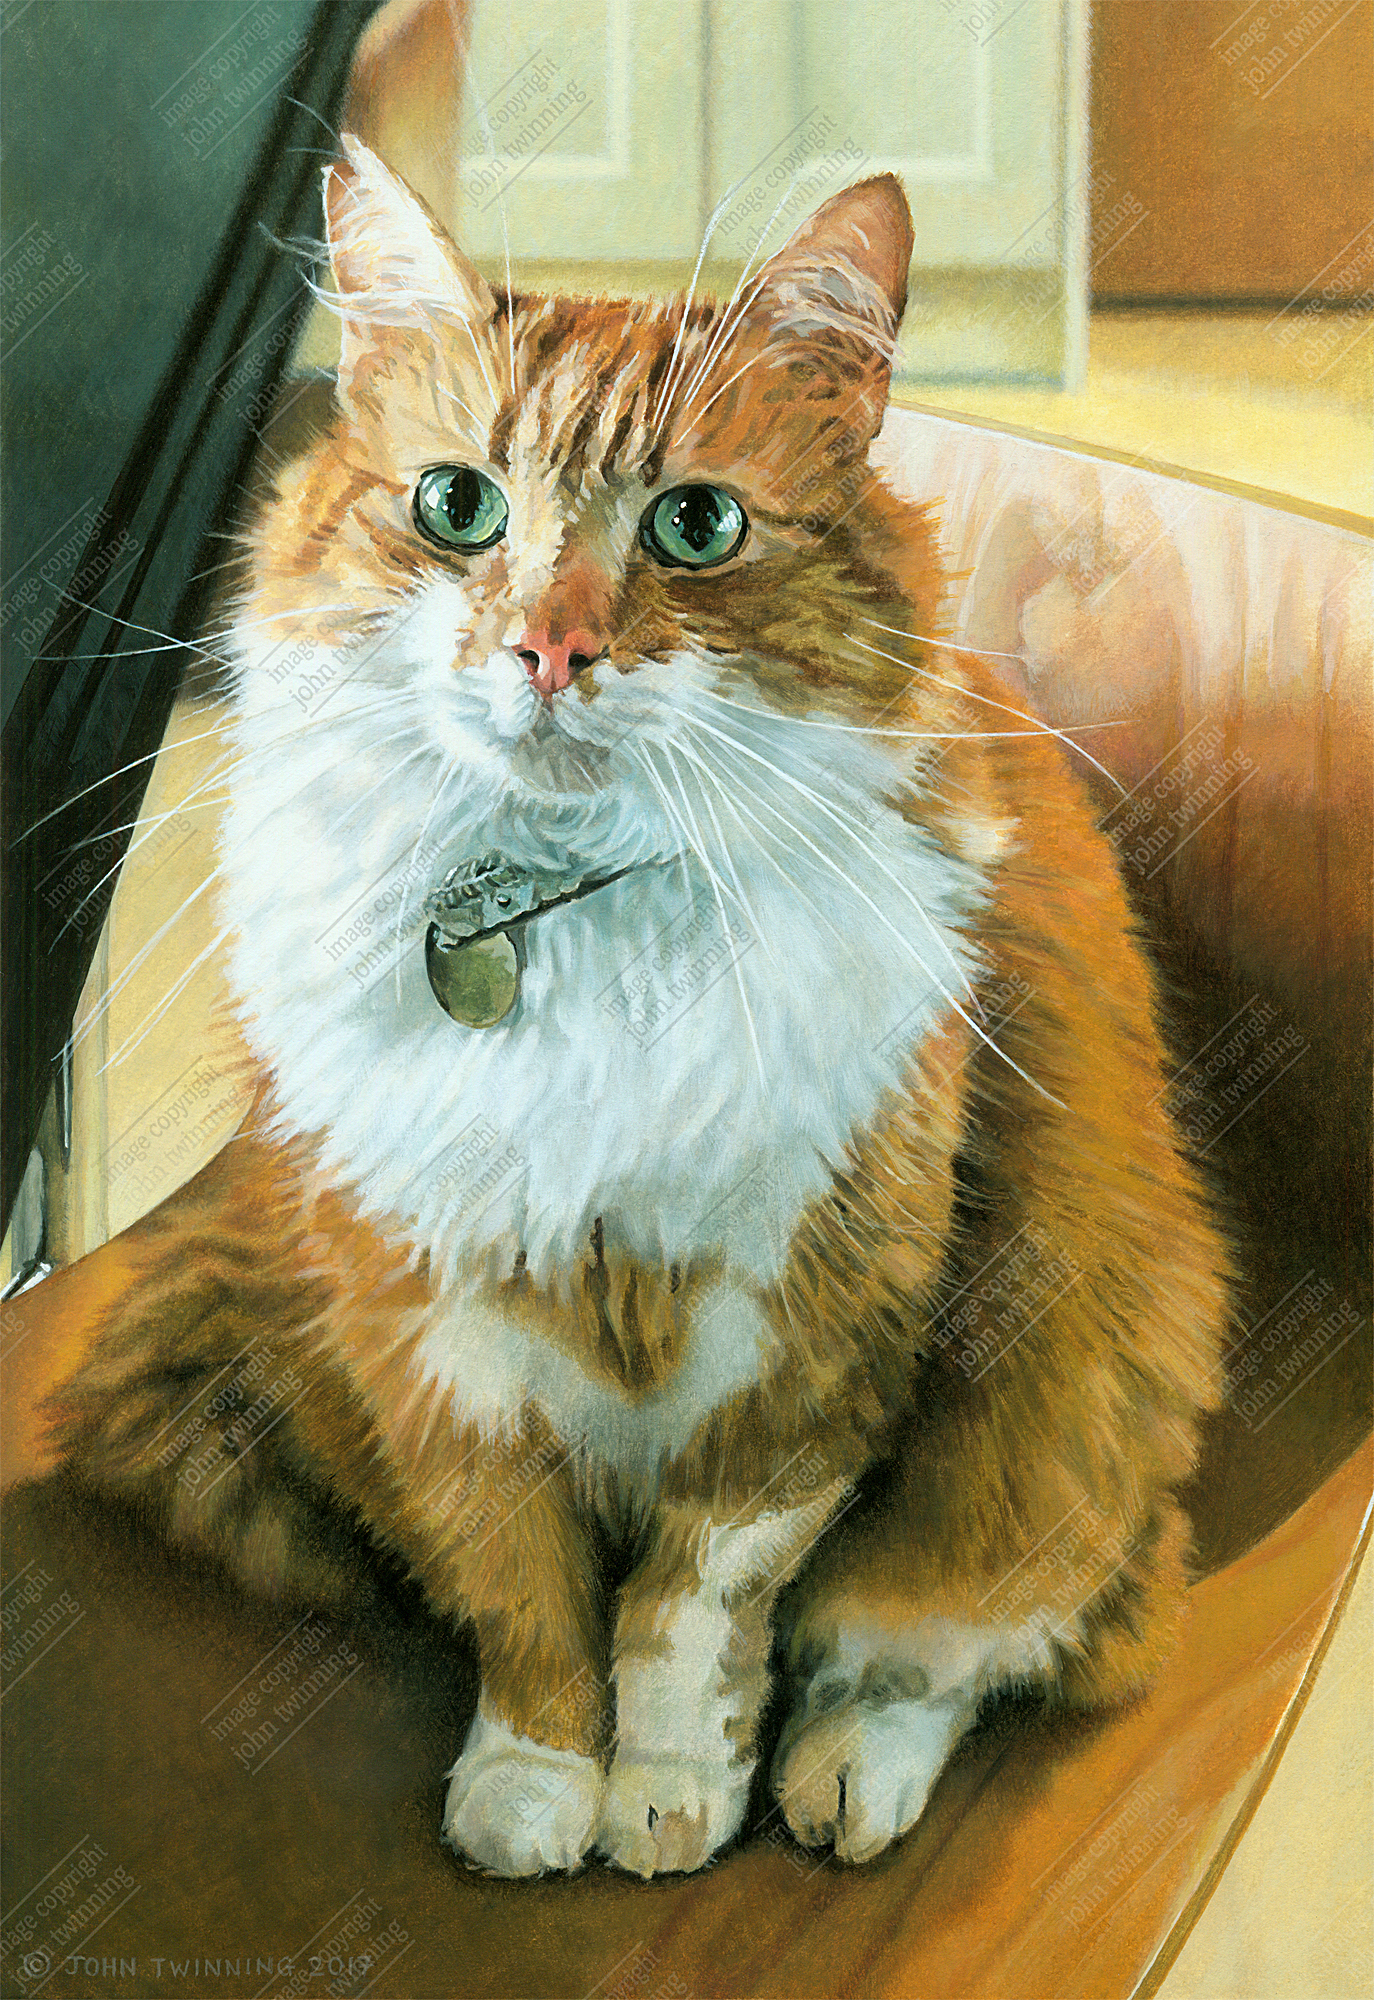 'Irvine Ginger' - art print from a pet portrait painting of an orange tabby cat